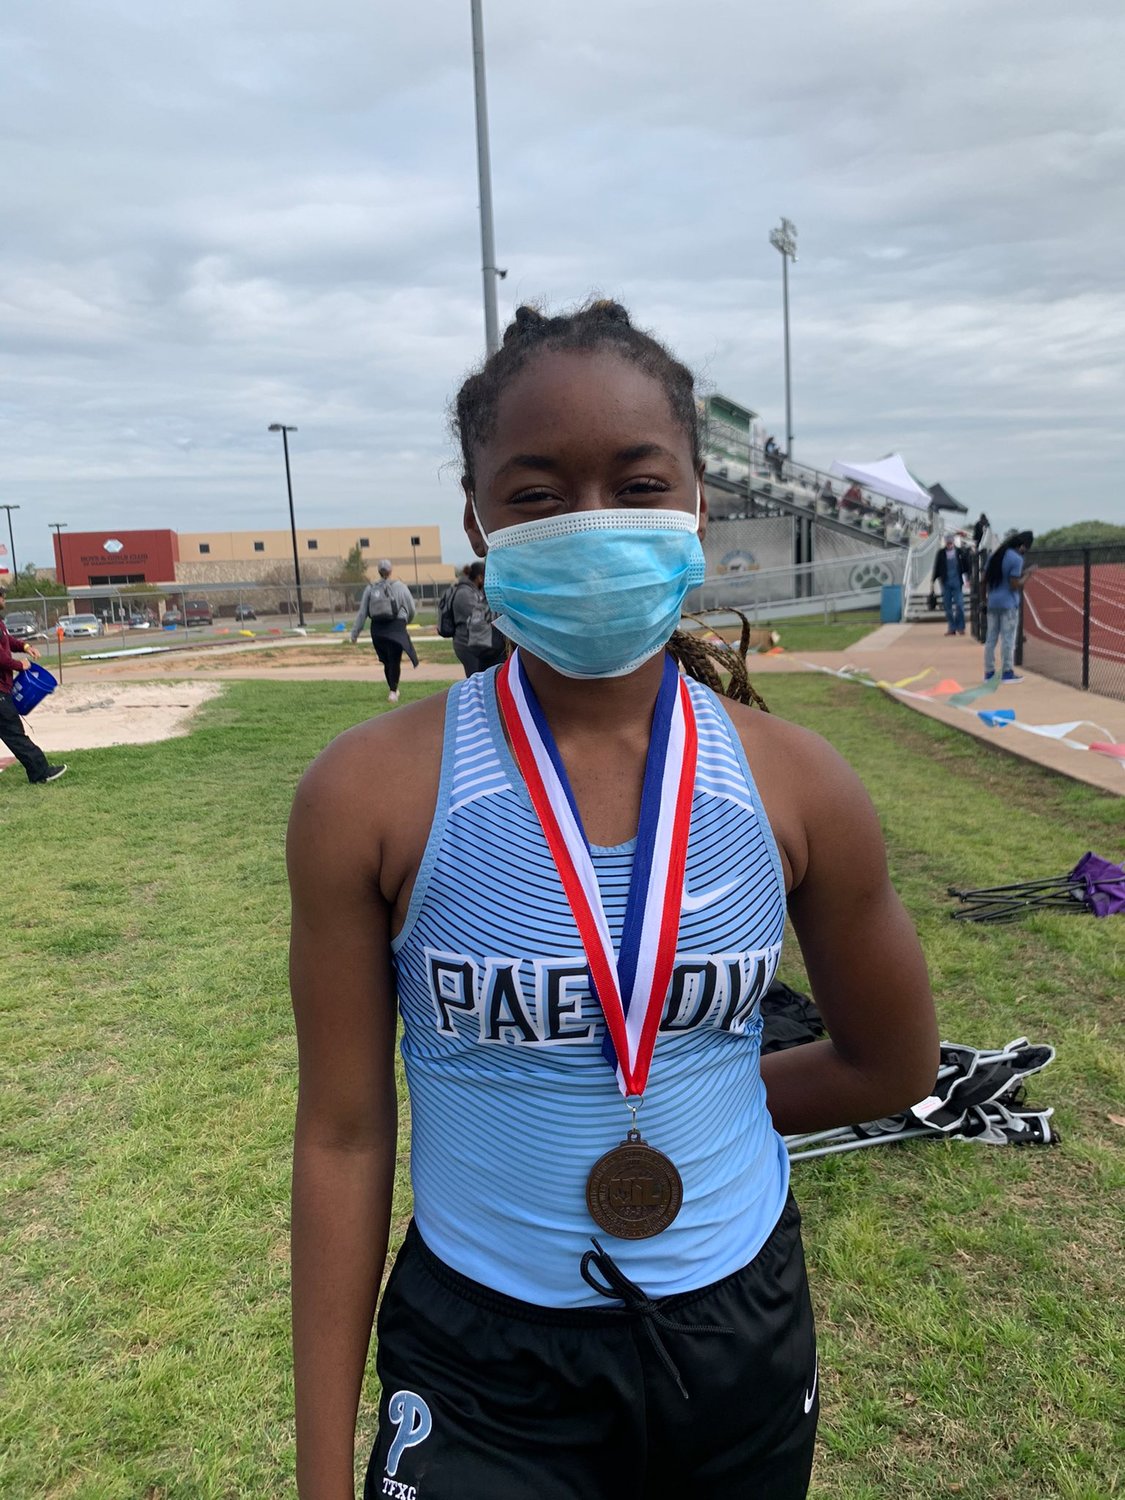 Paetow senior Tumi Onaleye won the 100 hurdles and 300 hurdles and was a member of the Panthers’ first place 4x400 relay team at the District 19-5A track and field meet in Brenham. Onaleye also finished second in the triple jump.